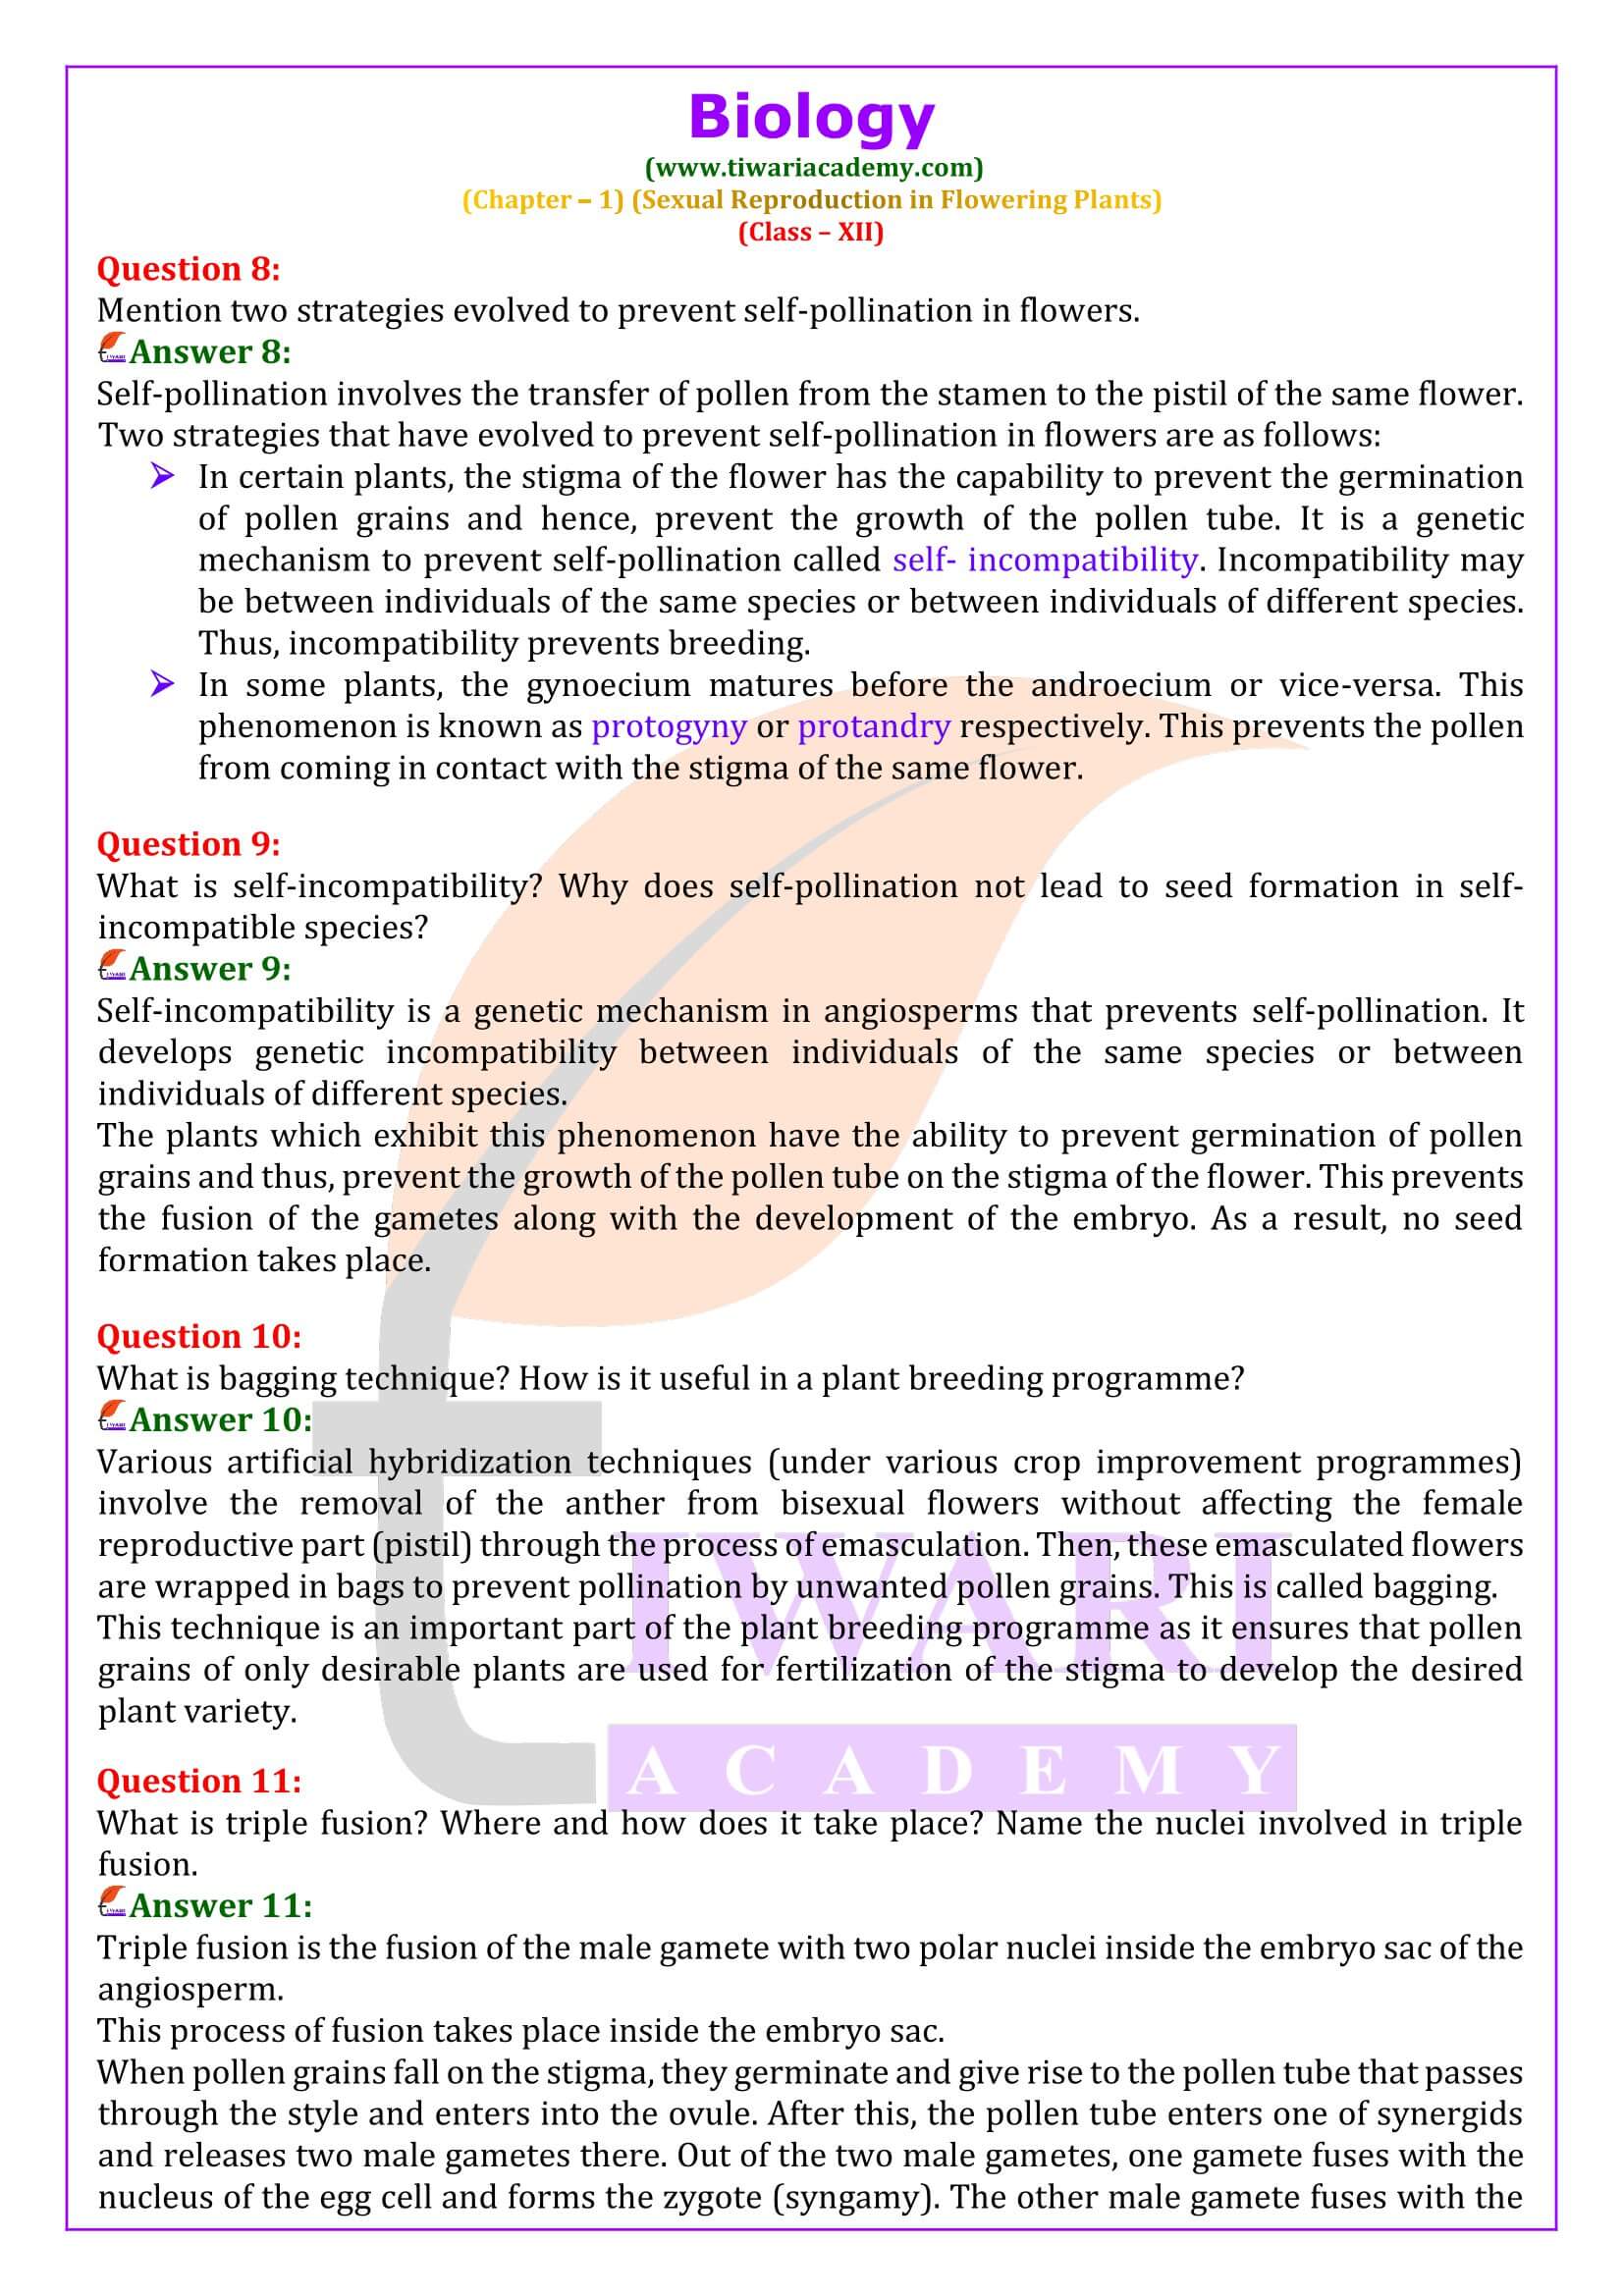 NCERT Solutions for Class 12 Biology Chapter 1 Question answers